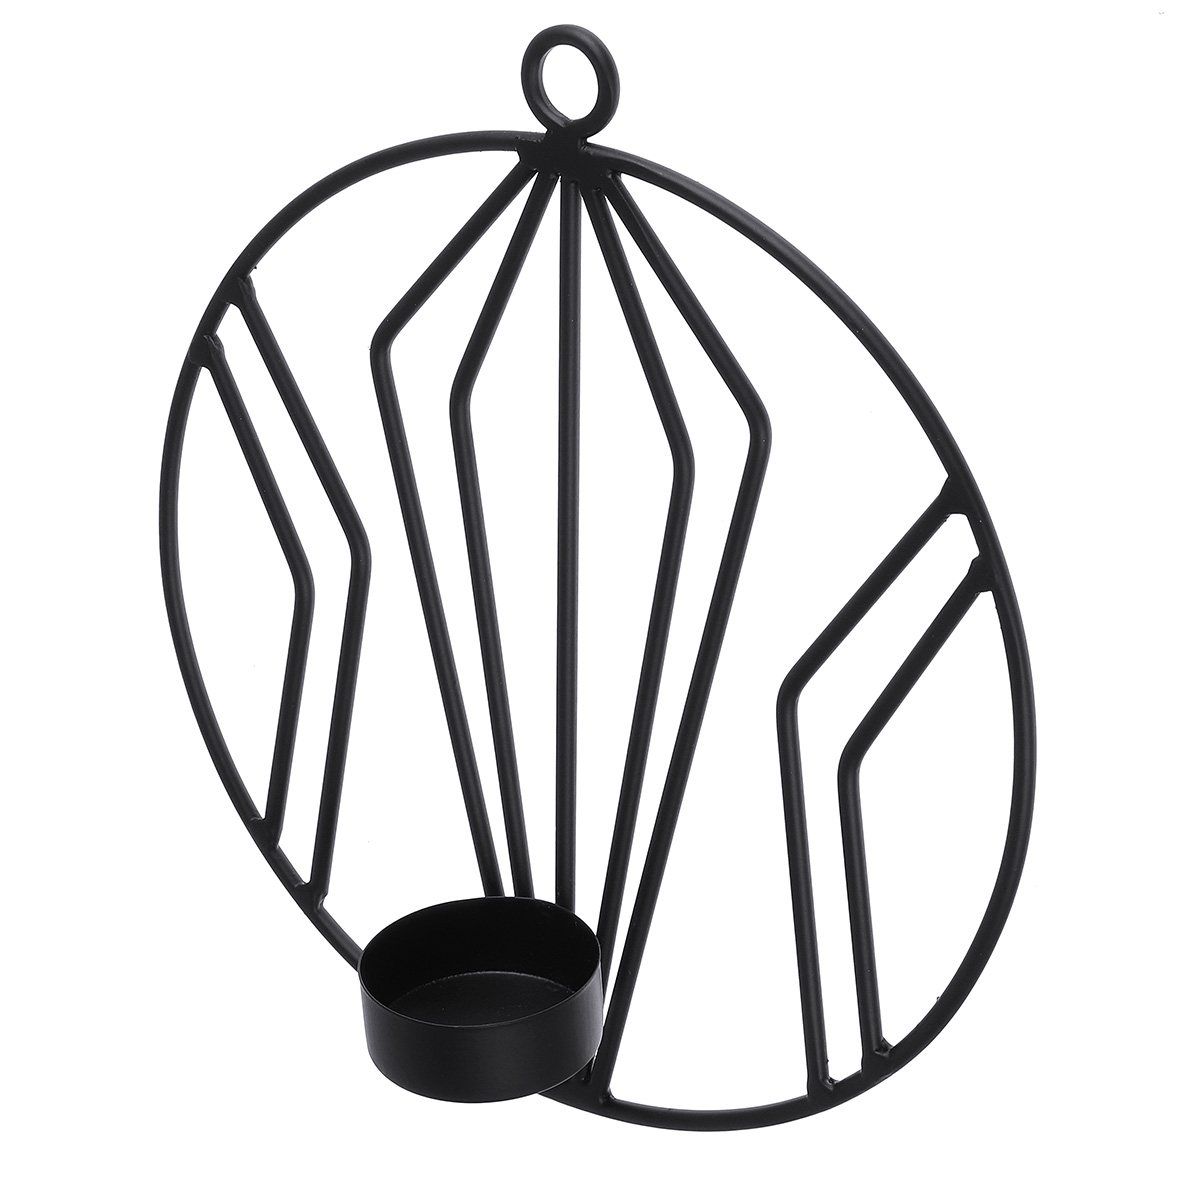 3D-Geometric-Candlestick-Iron-Wall-Candle-Holder-Sconce-Warm-Home-Party-Decor-1727945-11